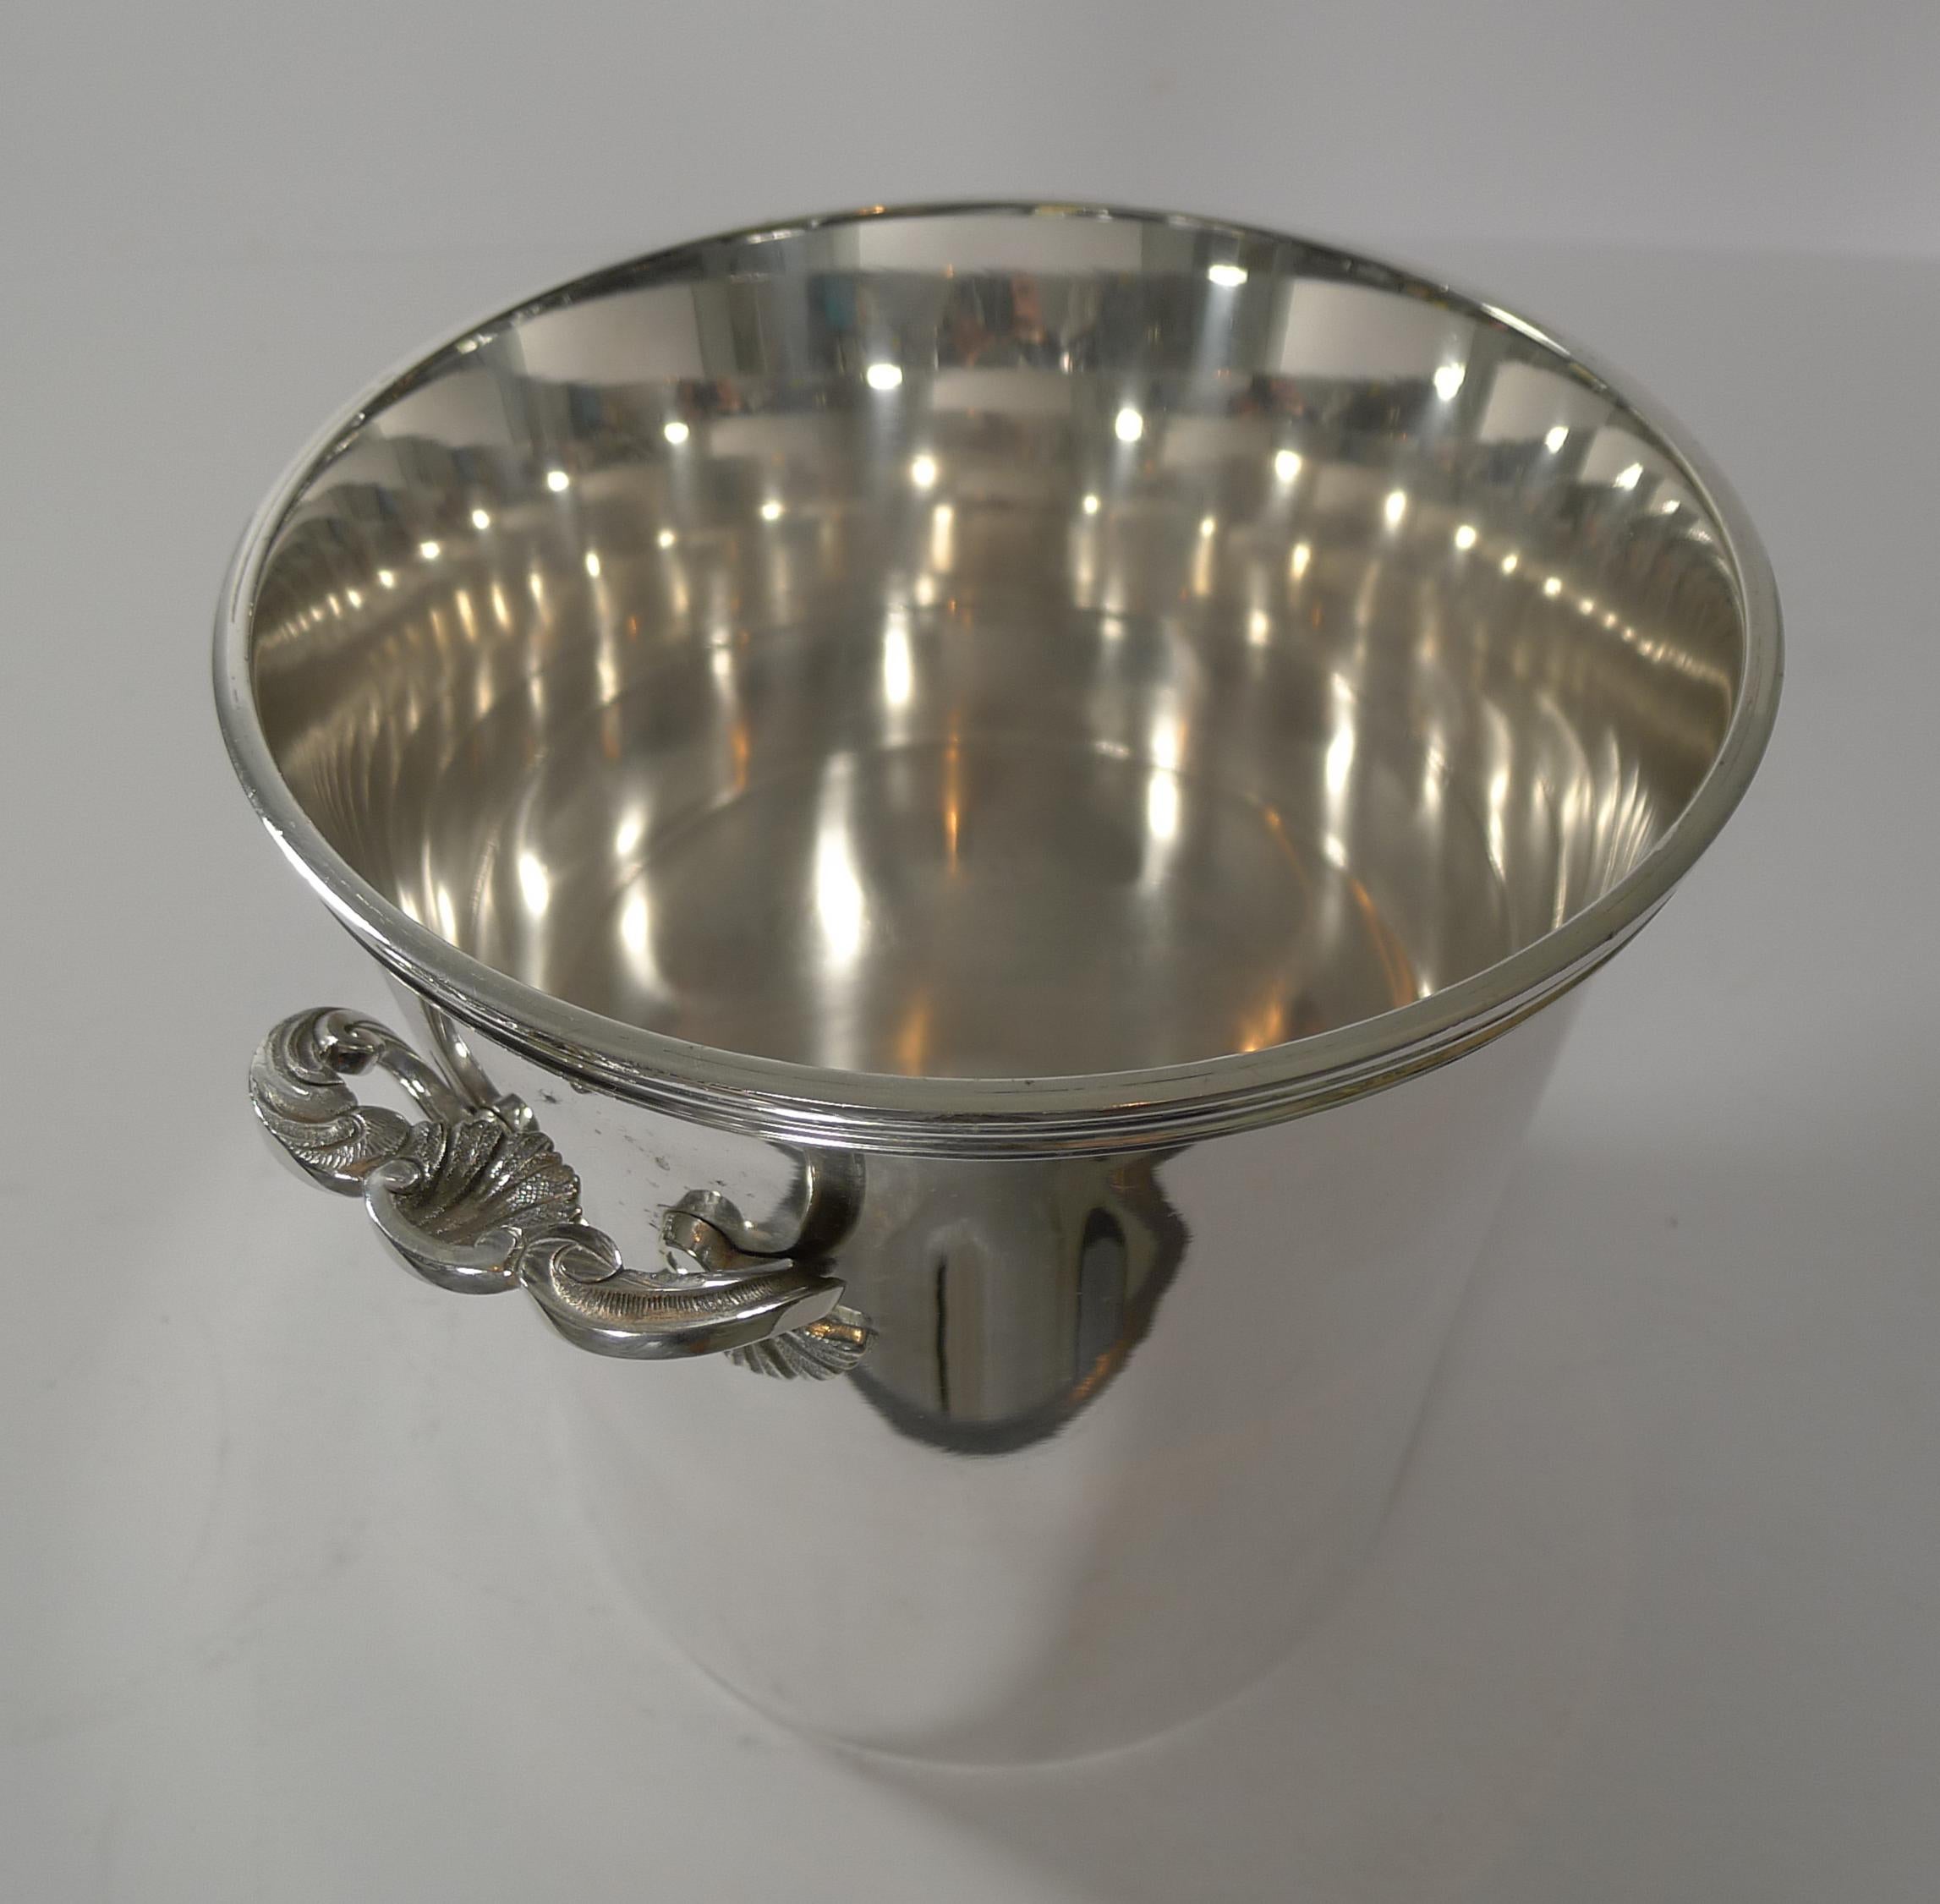 A fabulous vintage wine cooler or Champagne bucket, French in origin and dating to the 1930s or 1940s, a lovely quality piece with a good weight.

It has just returned to us from our silversmith's workshop where it has been professionally cleaned